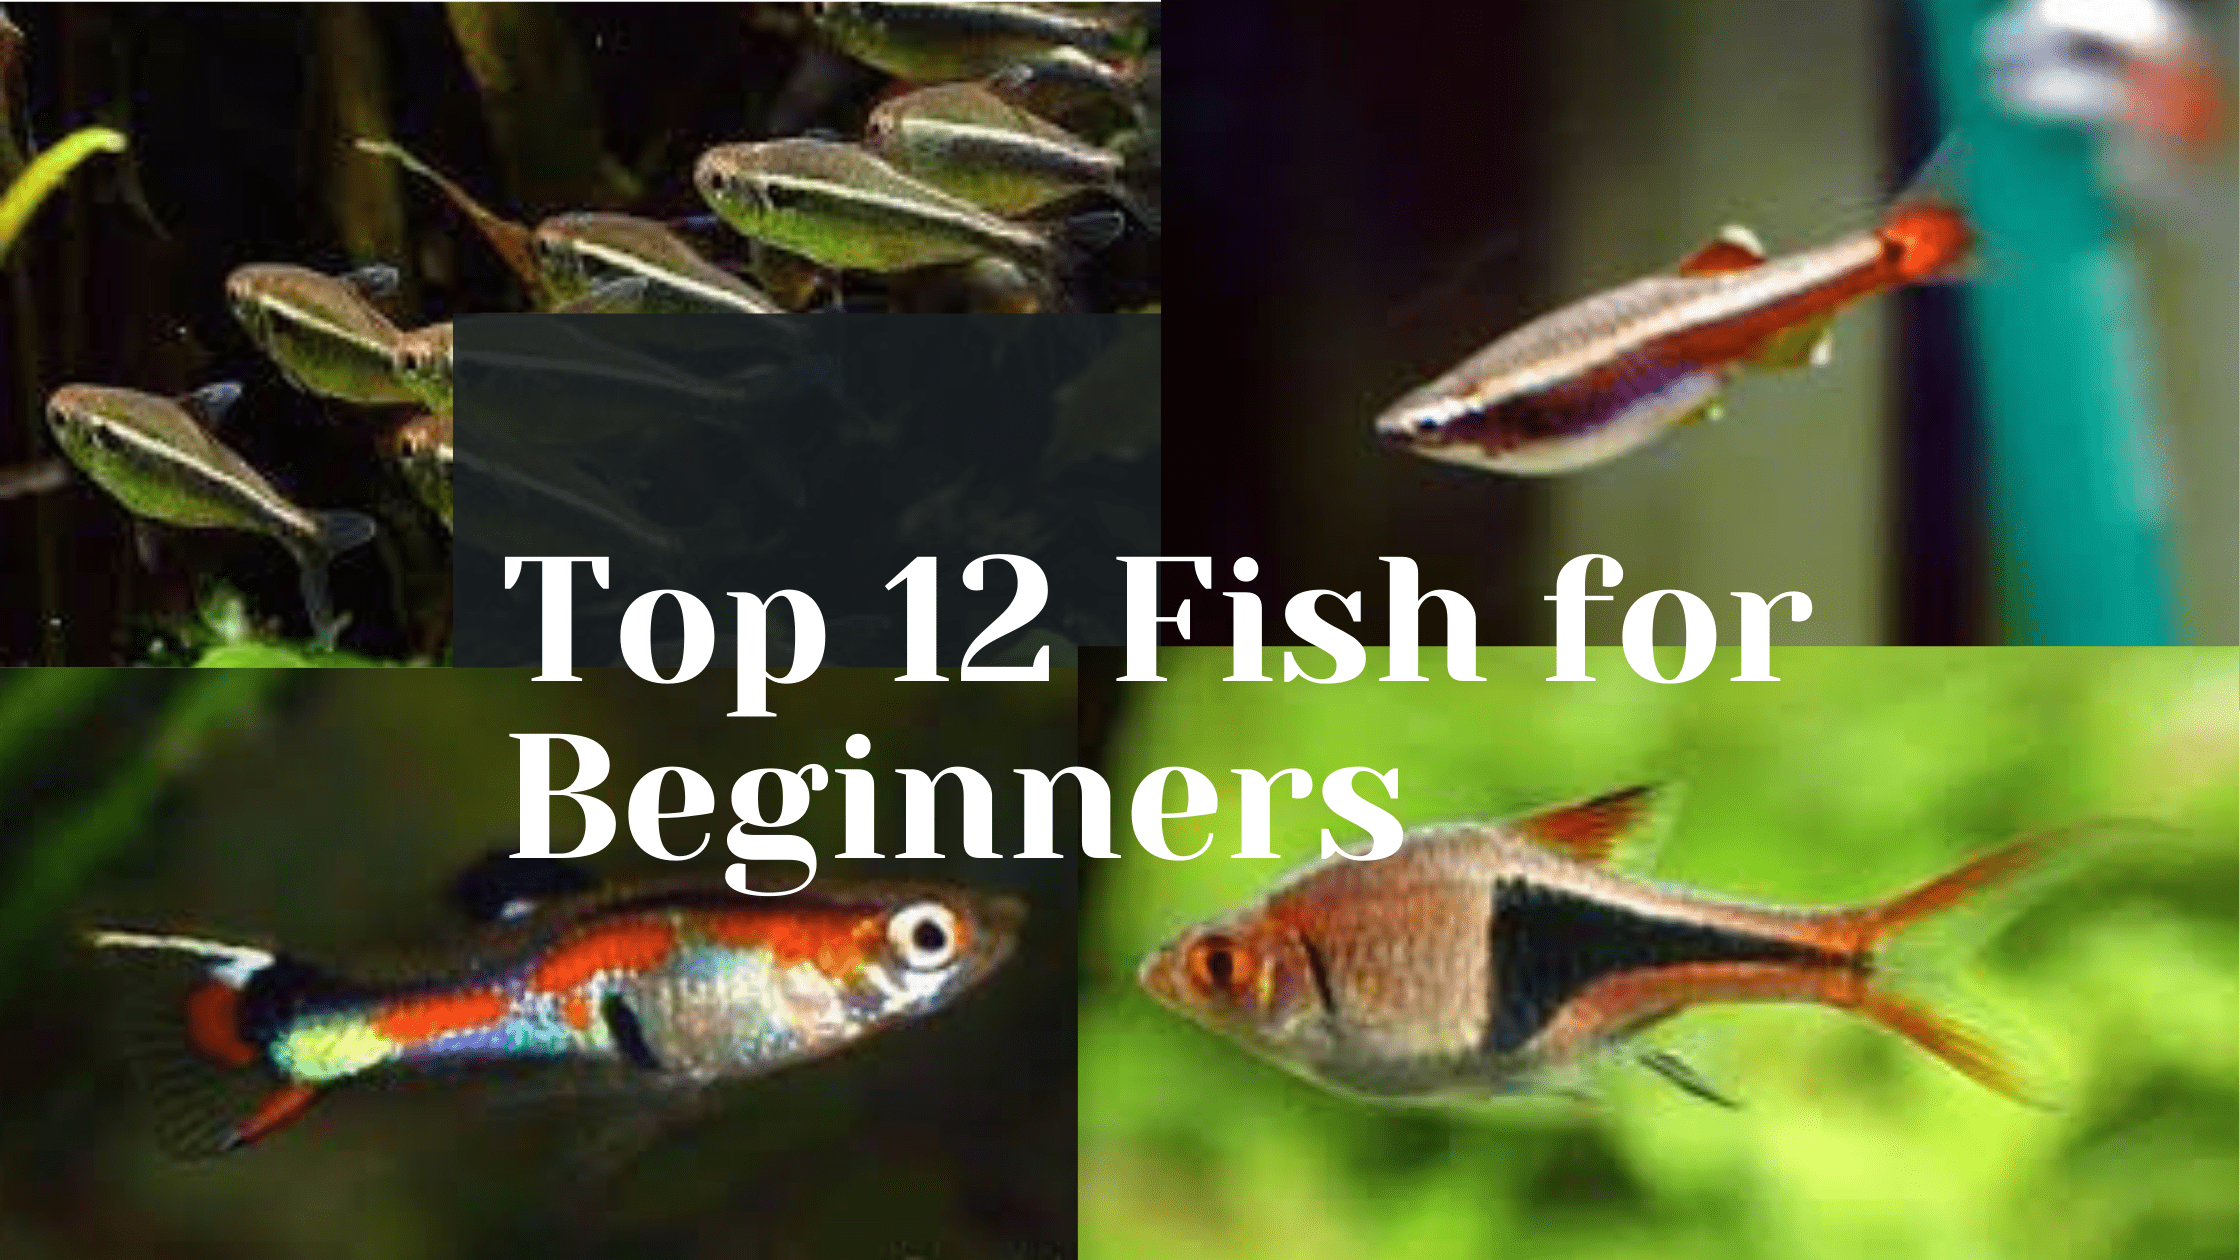 Top 12 fish for beginners